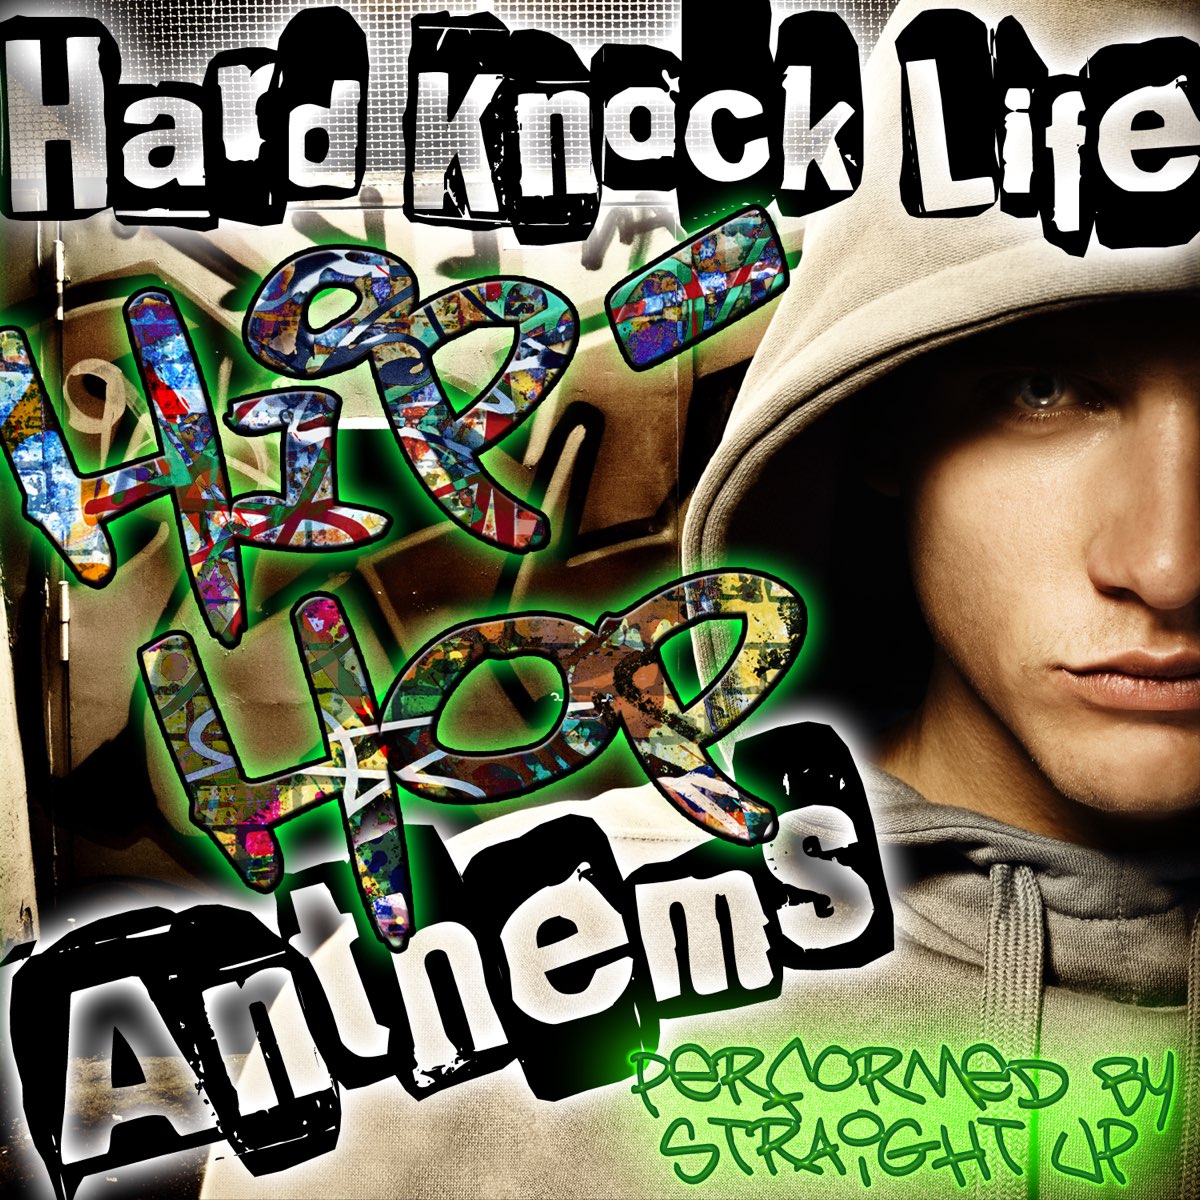 Hard Knock Life (Ghetto Anthem). Rappin Rodney. Straight up Ultimate. Keep their heads Ringin'.